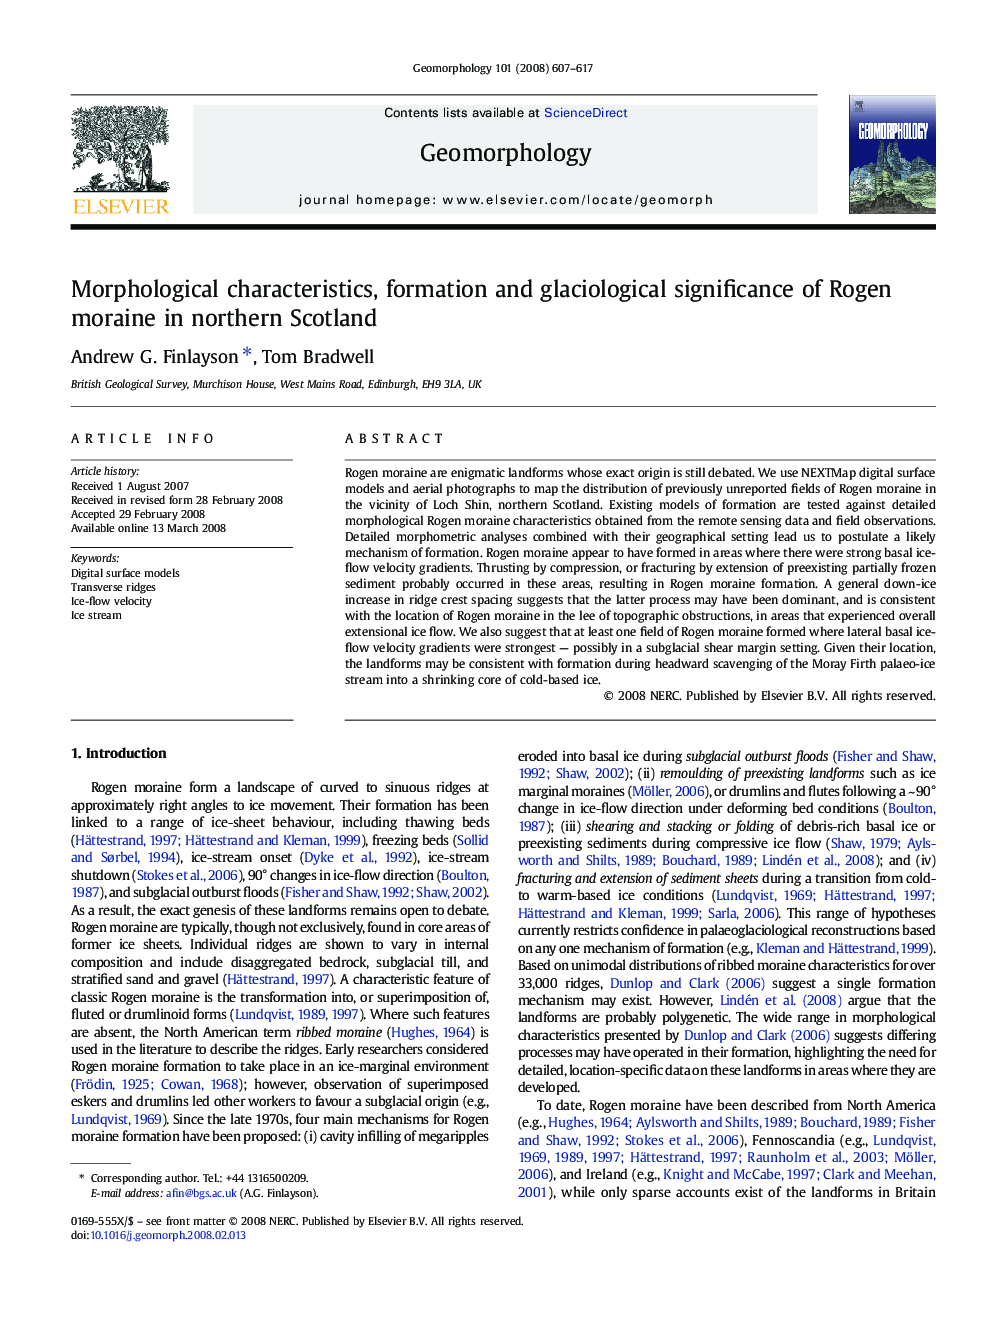 Morphological characteristics, formation and glaciological significance of Rogen moraine in northern Scotland